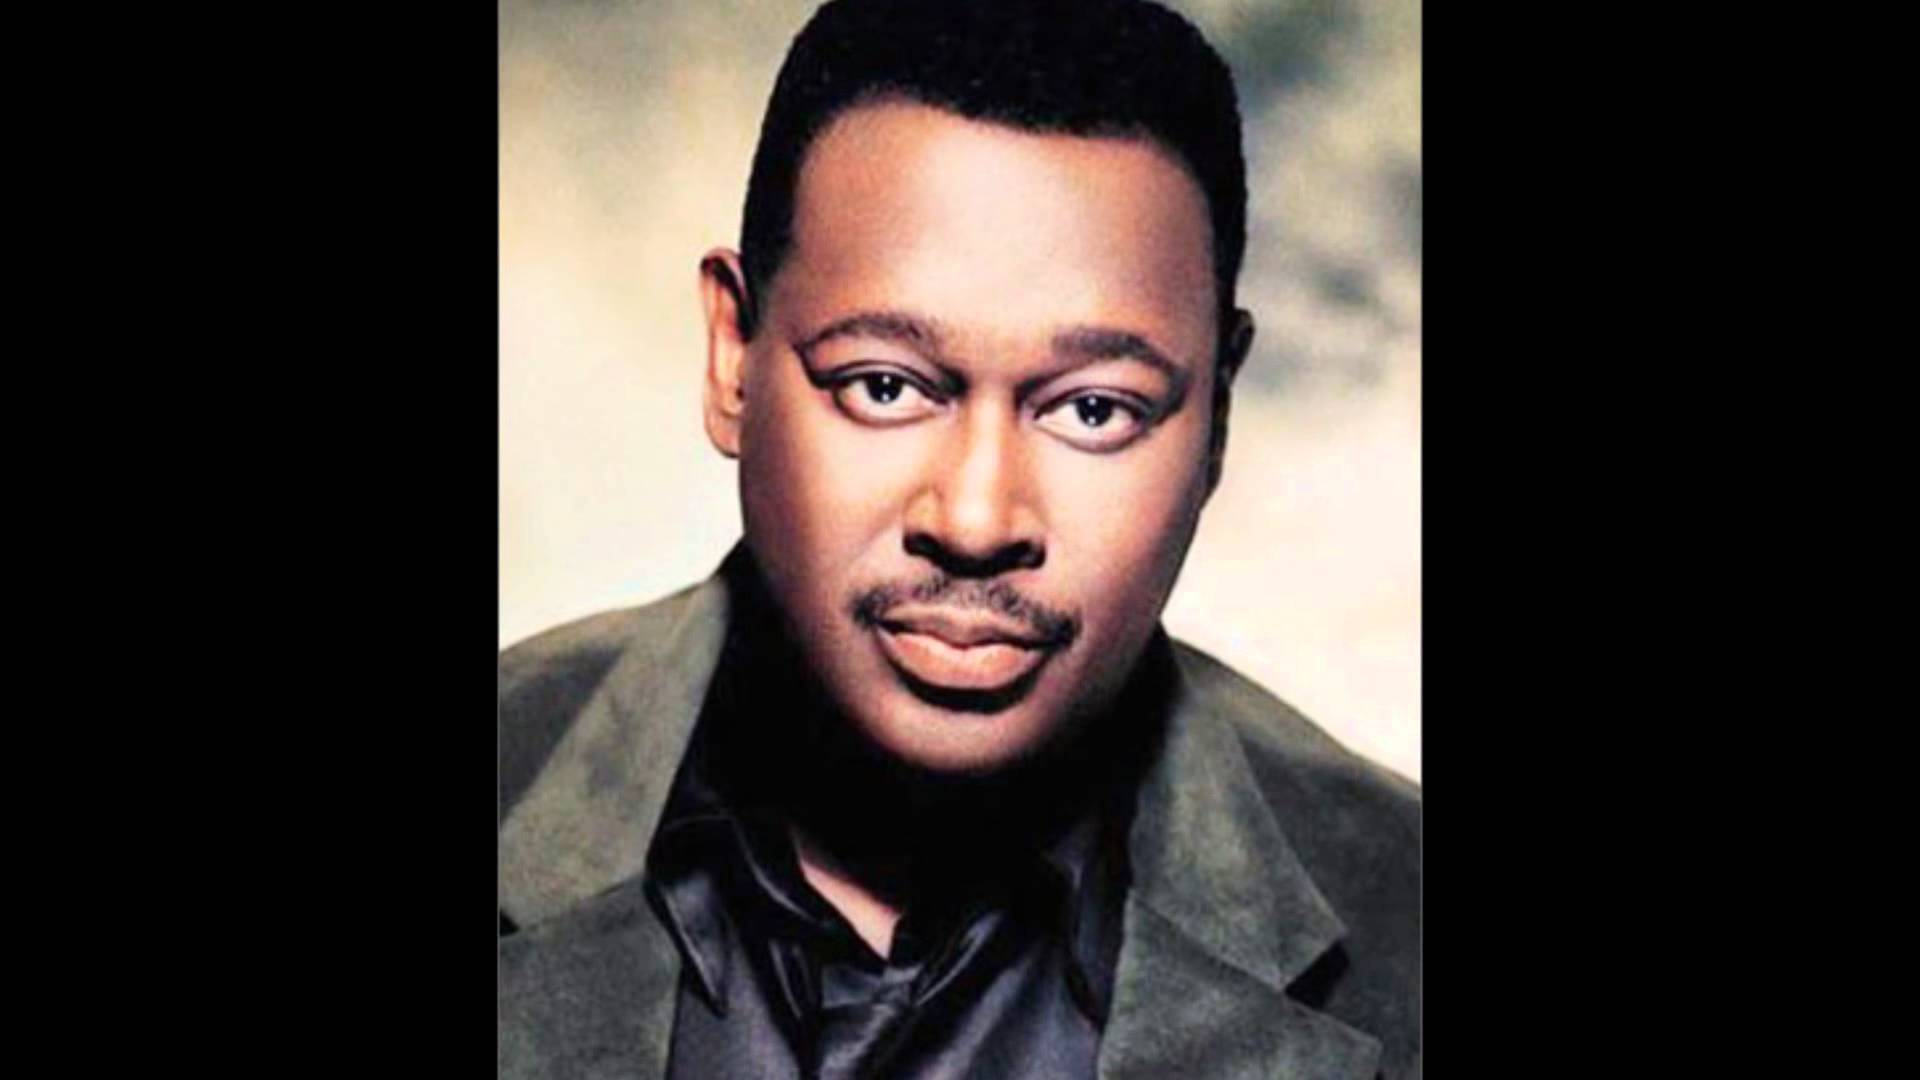 Luther Vandross Backgrounds, Compatible - PC, Mobile, Gadgets| 1920x1080 px